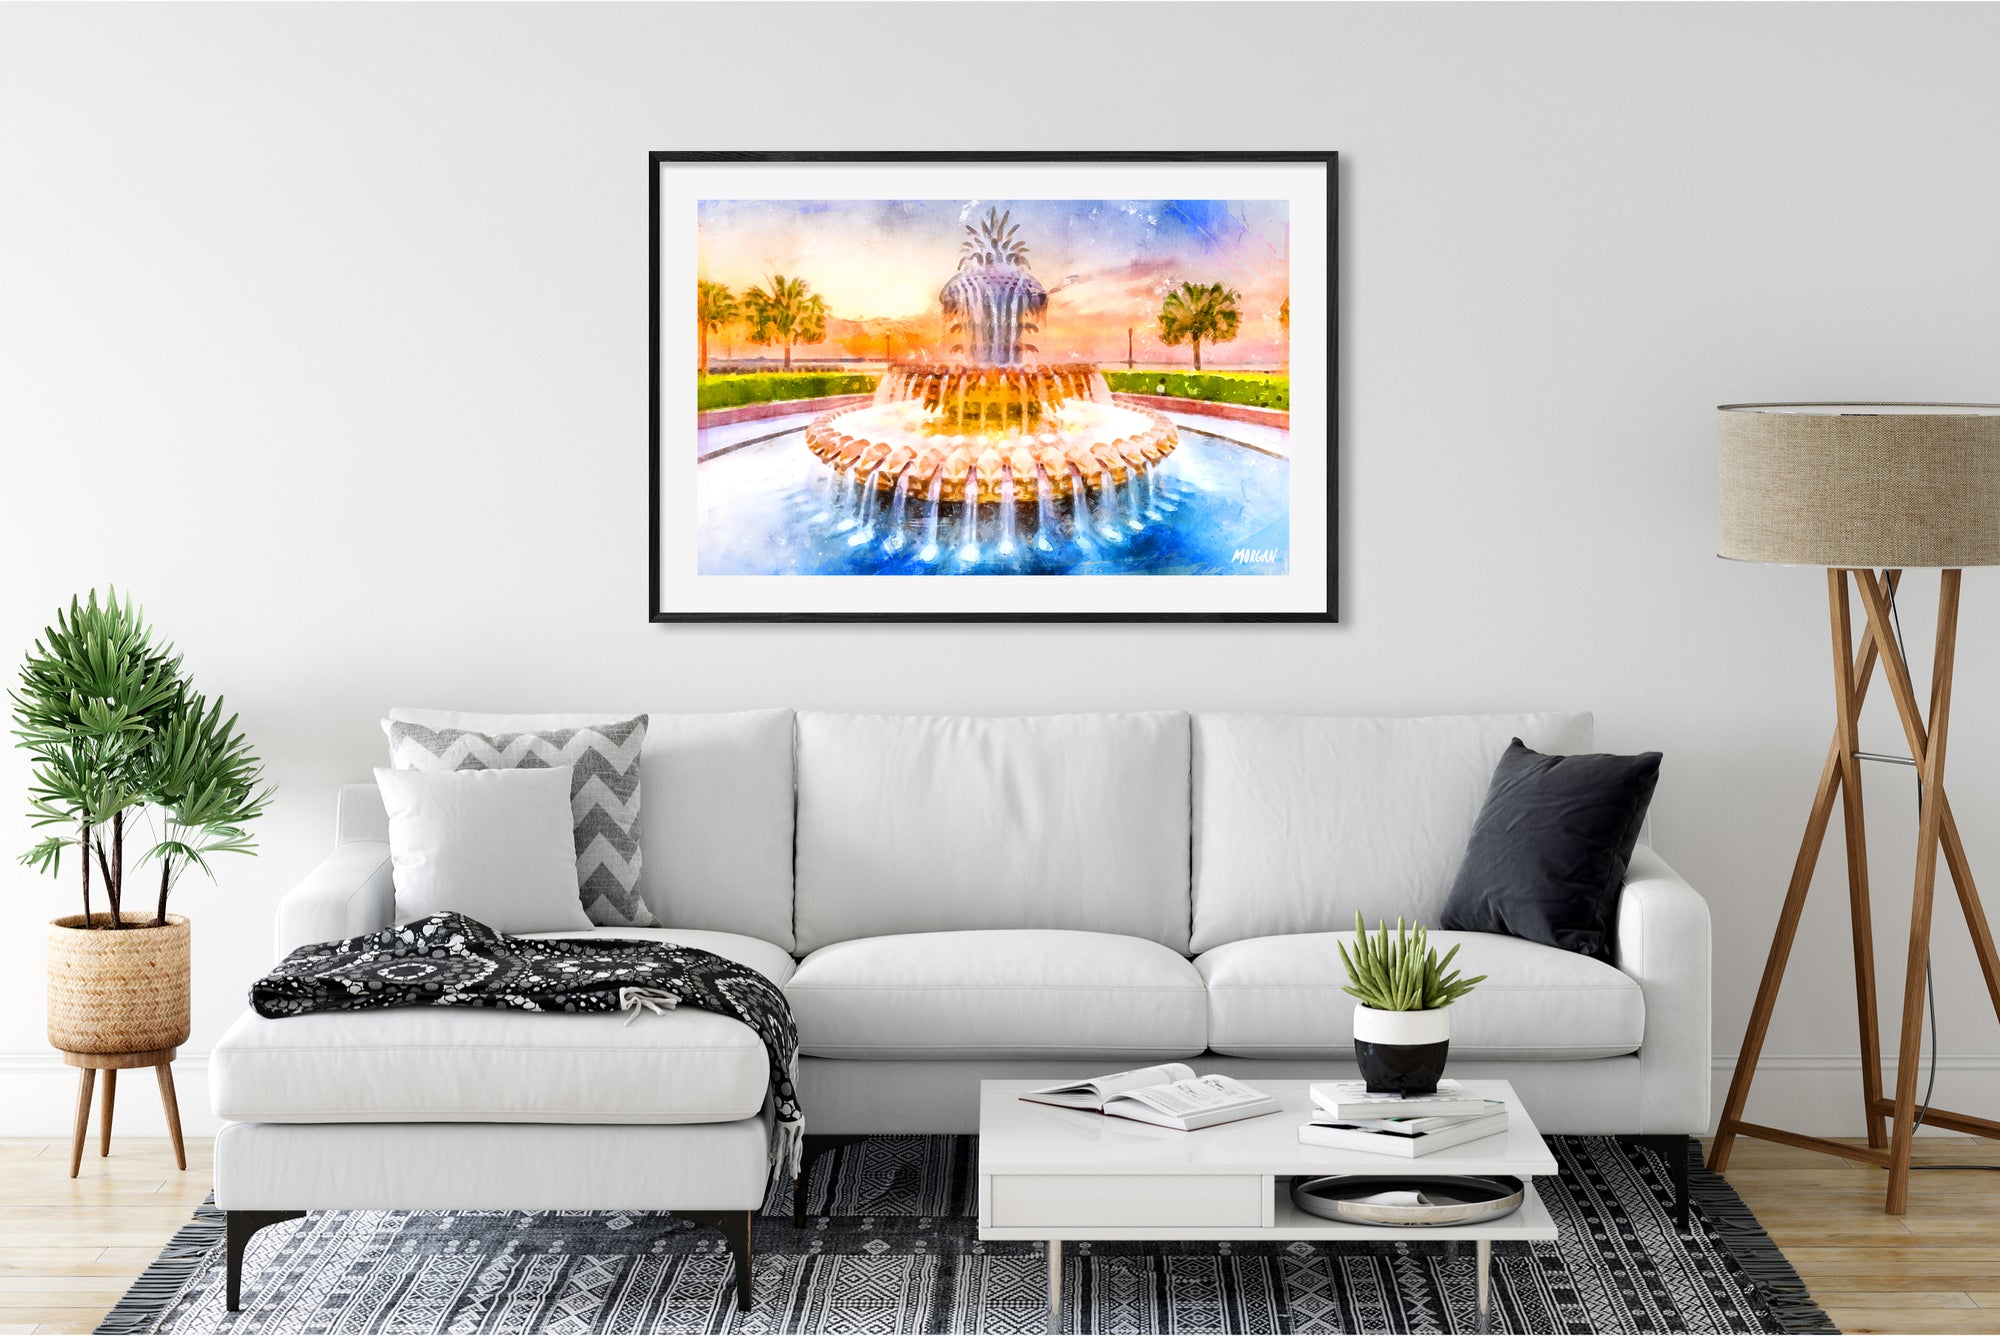 Pineapple Fountain - Charleston Watercolor Painting in room